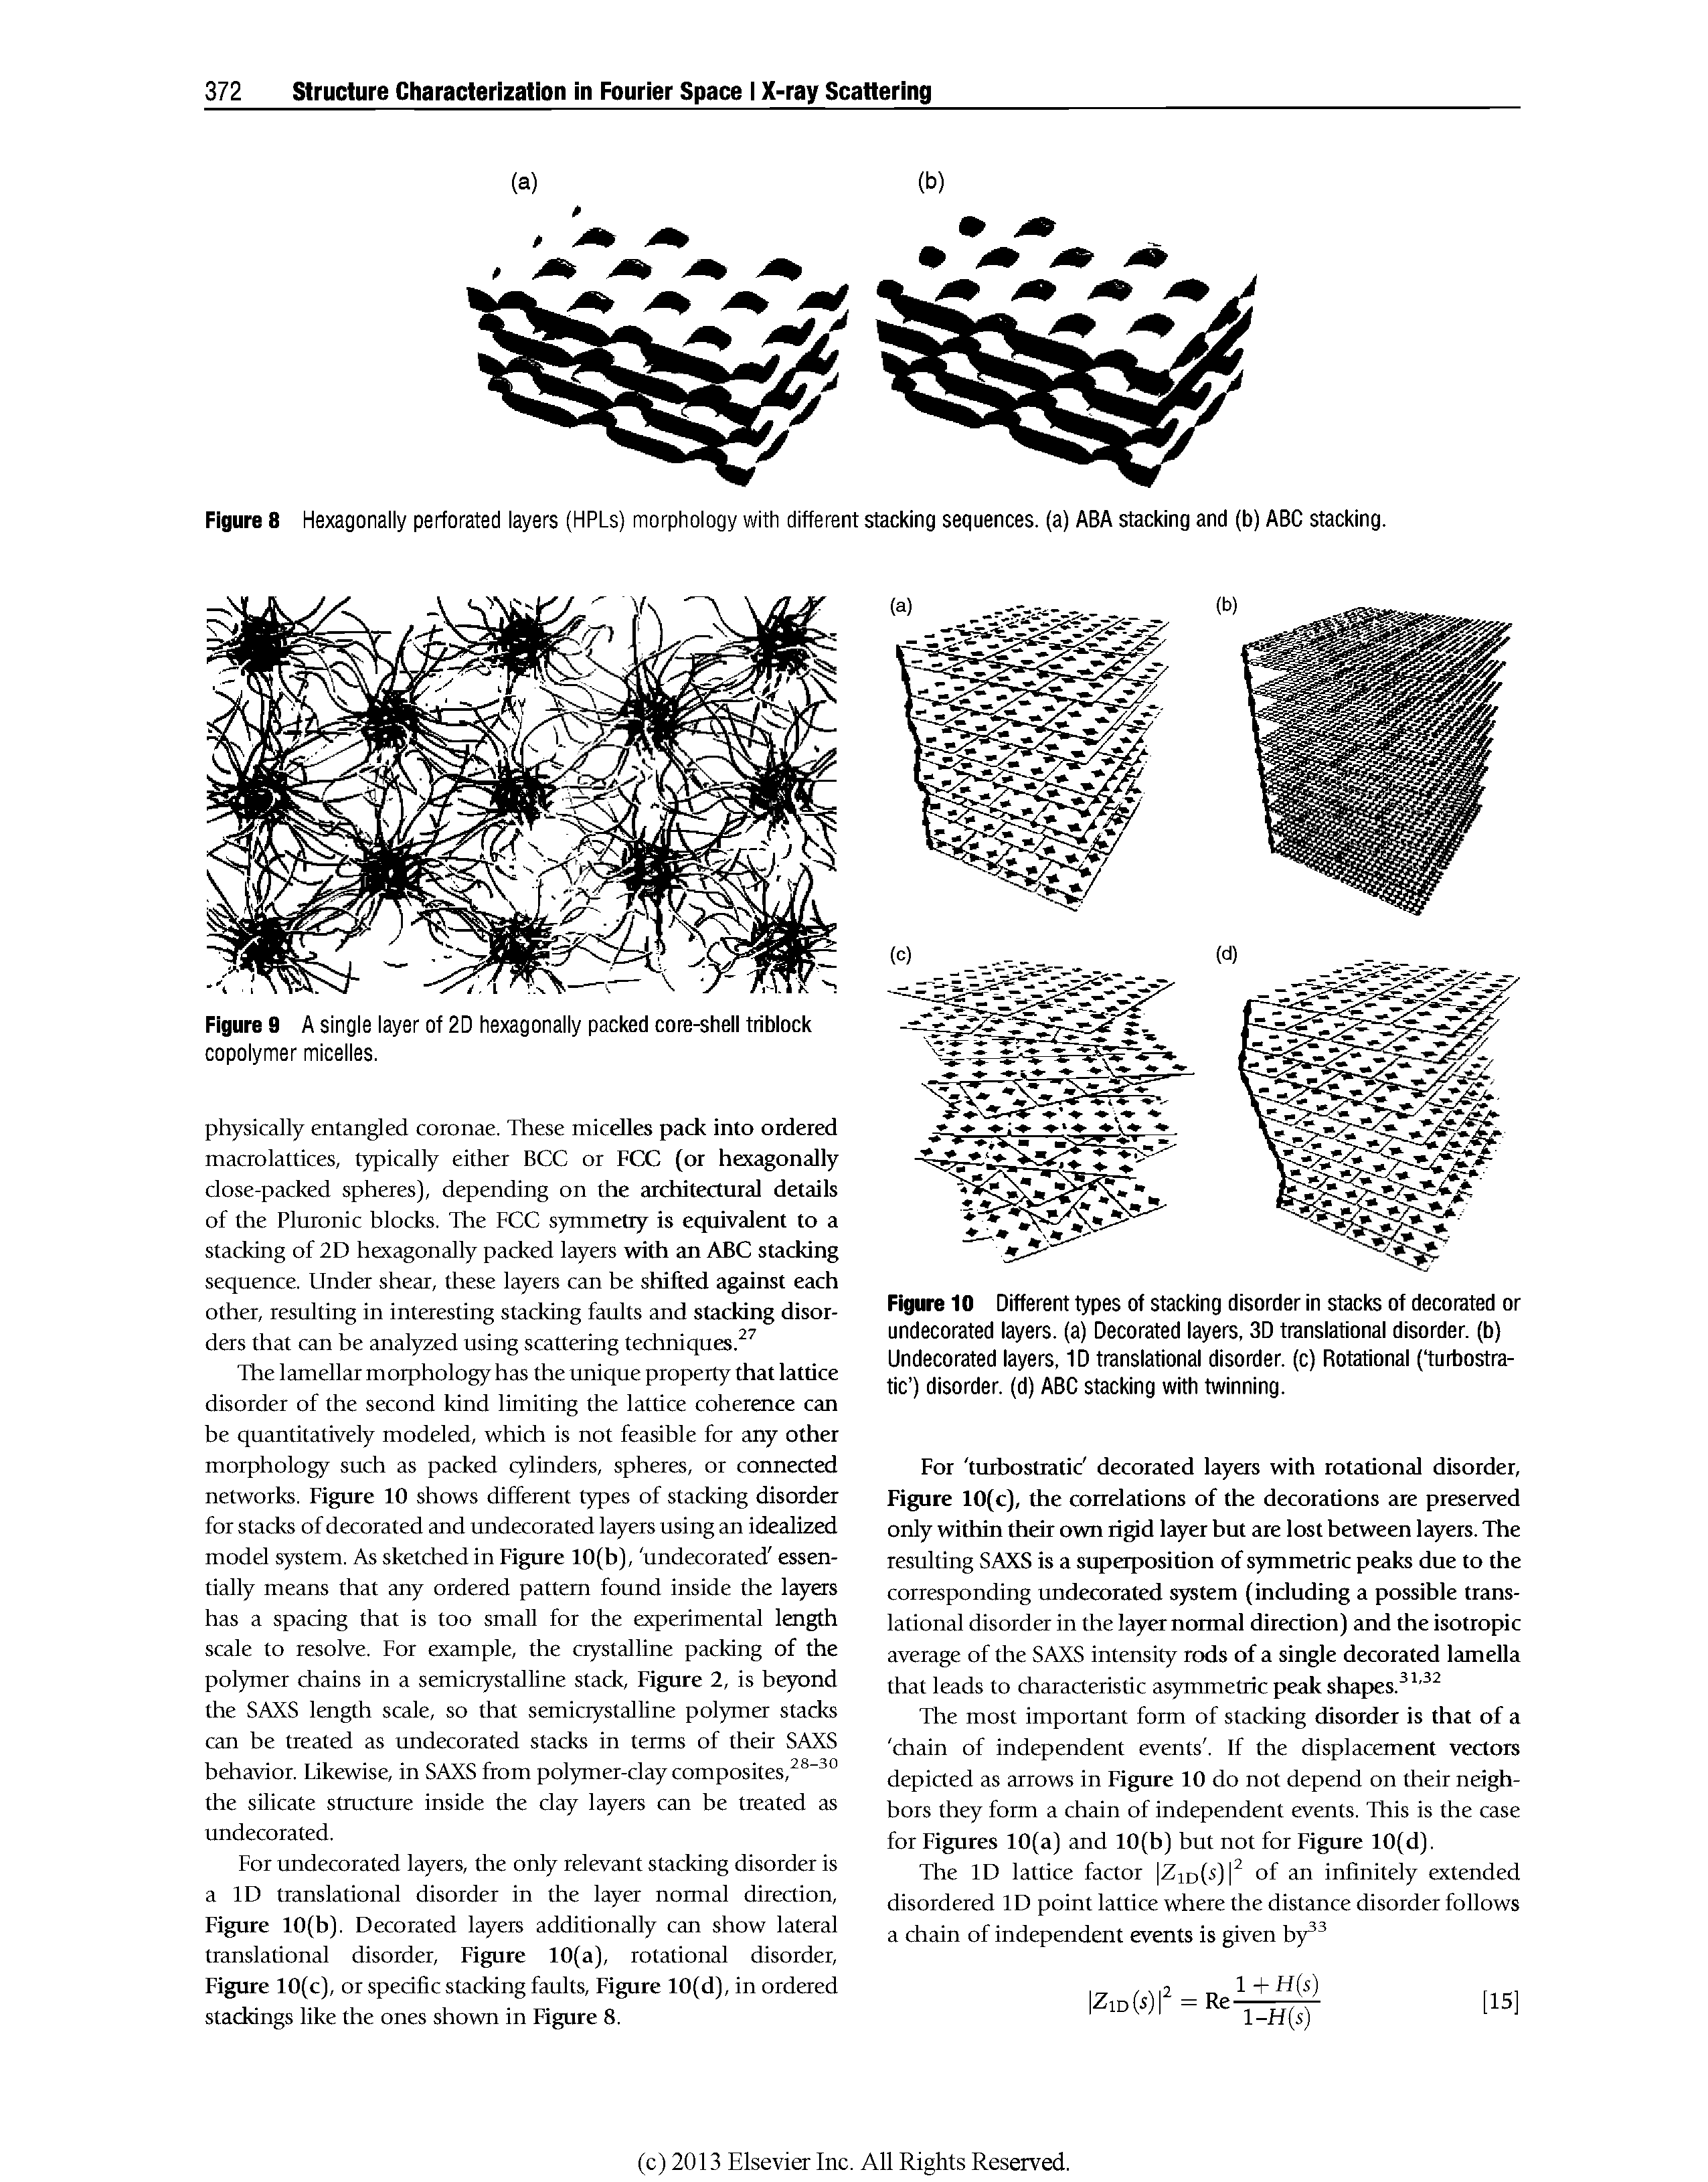 Figure 8 Hexagonally perforated layers (HPLs) morphology with different stacking sequences, (a) ABA stacking and (b) ABC stacking.